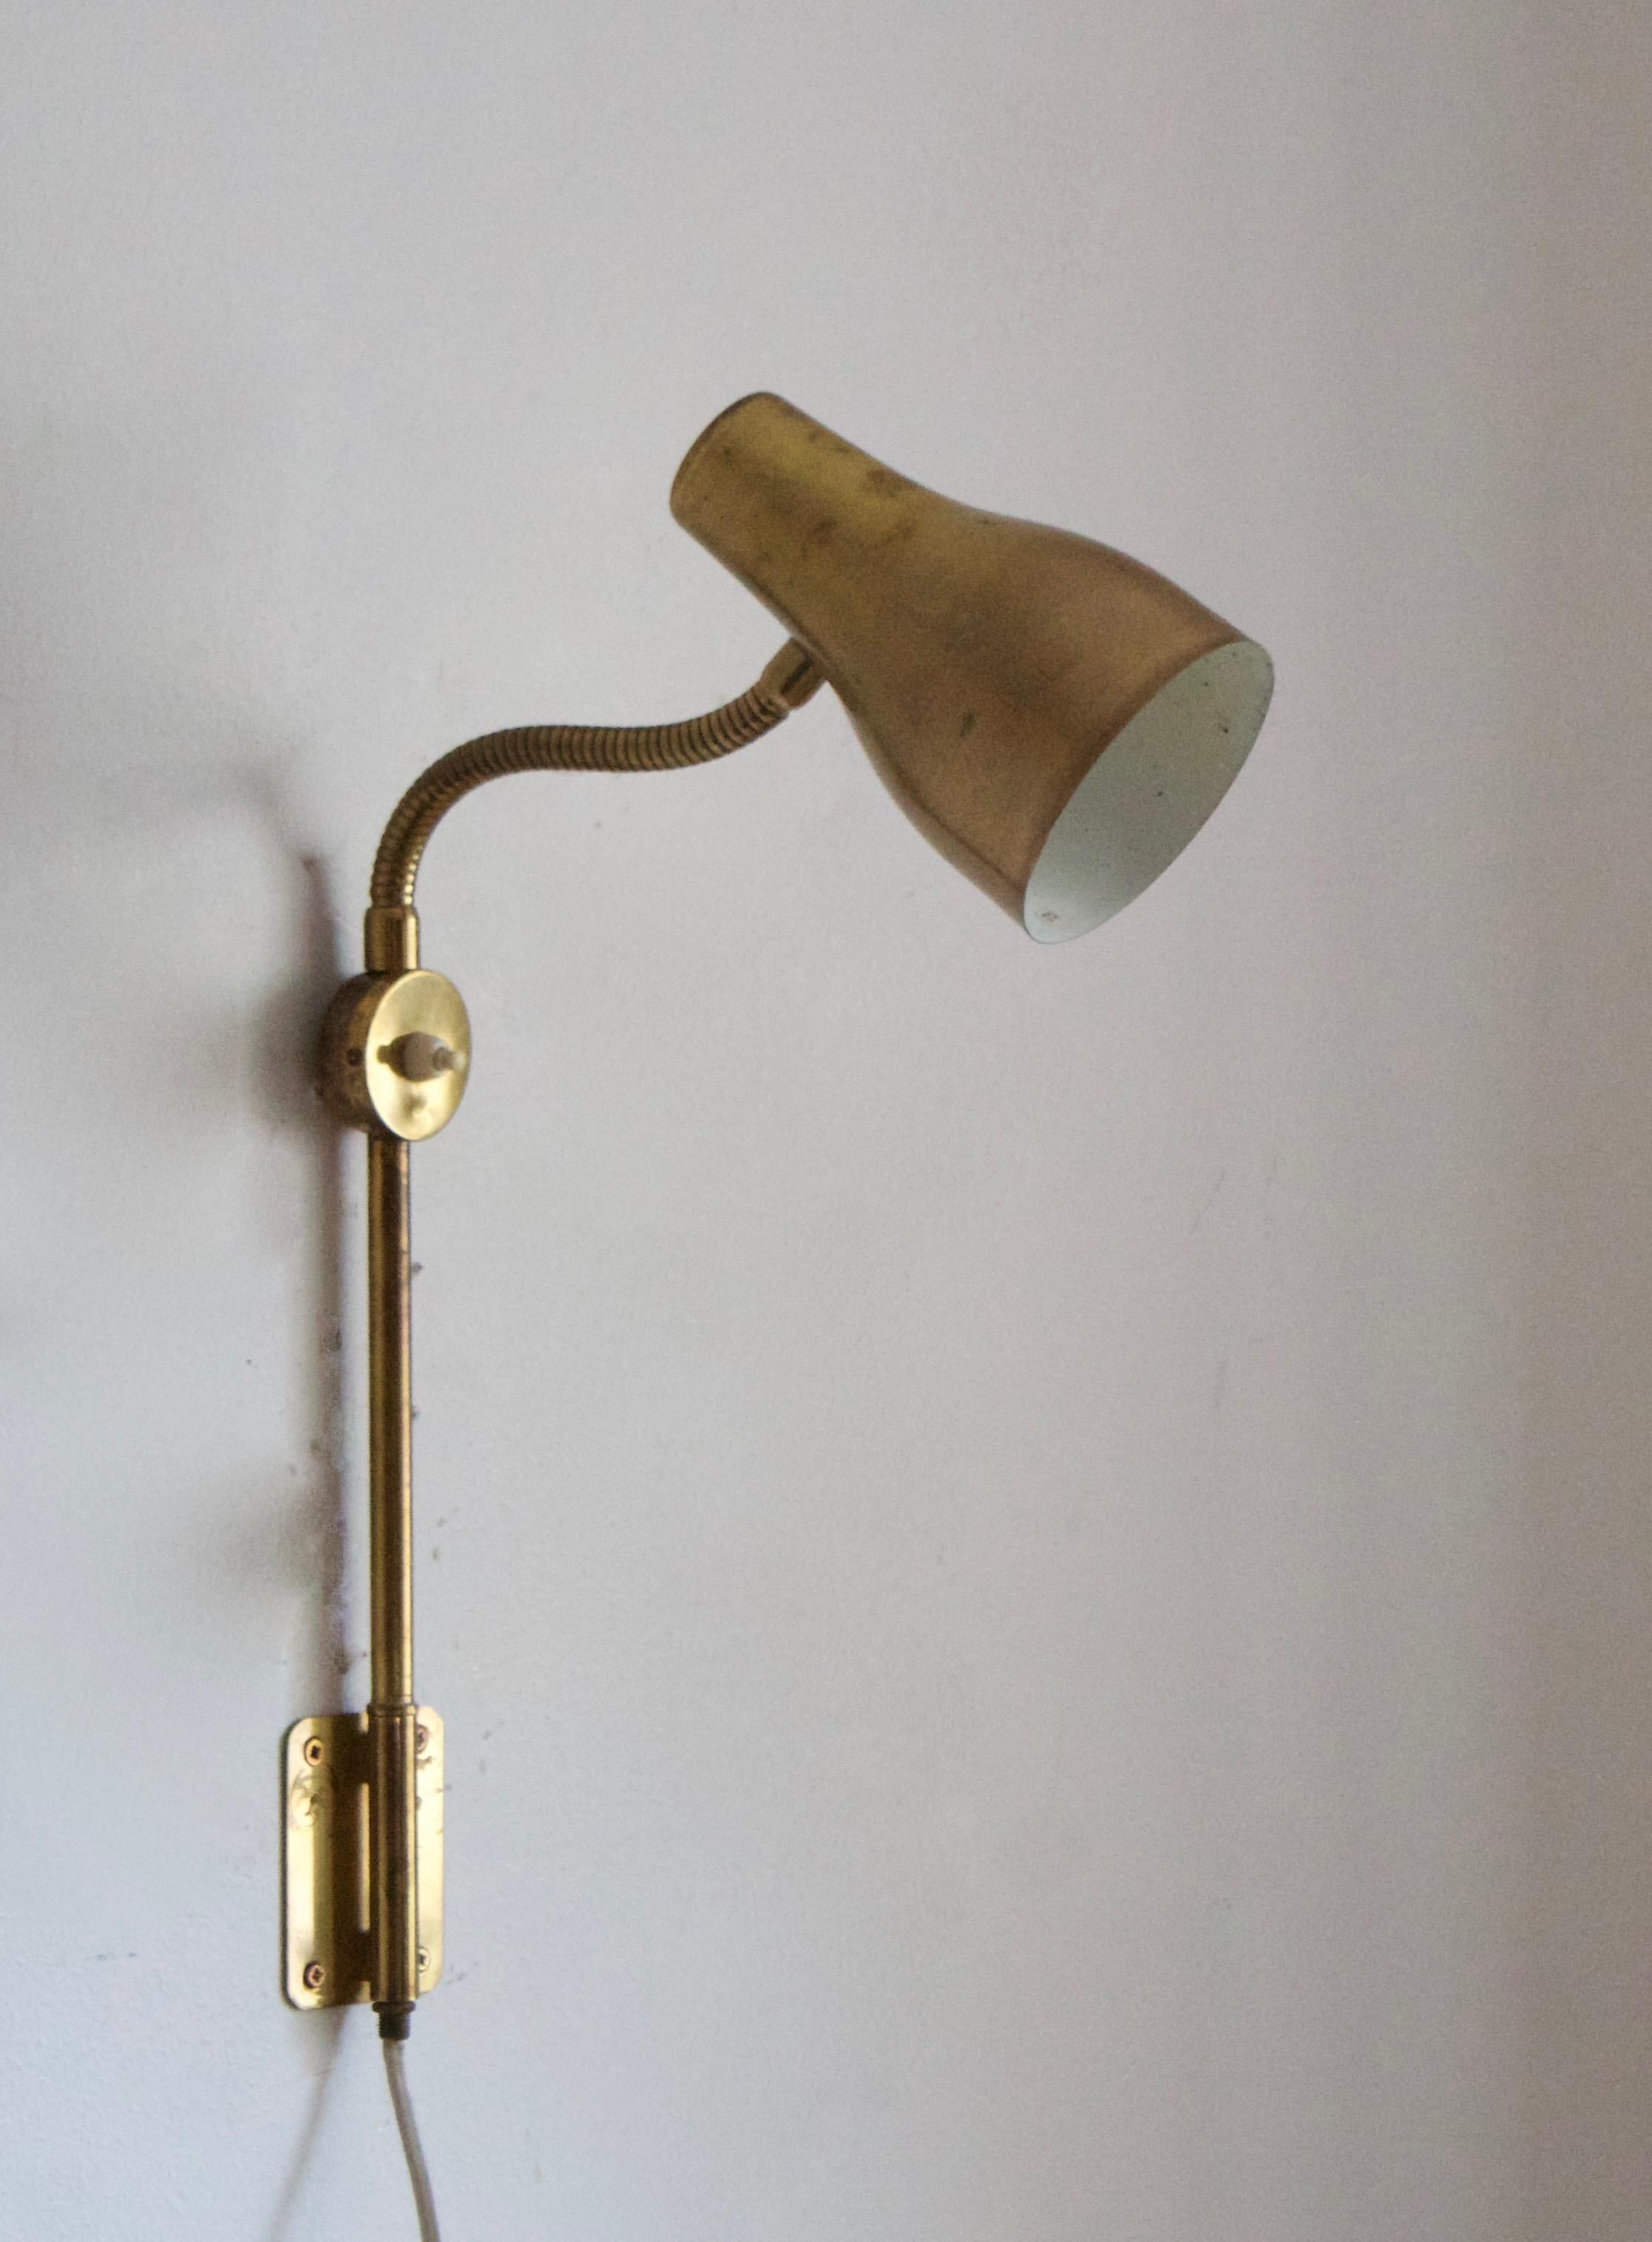 A functionalist wall light / task light, designed and produced in Sweden, 1950s-1960s. Features brass.

Takes one lightbulb on E27 socket. 25W stated max wattage.